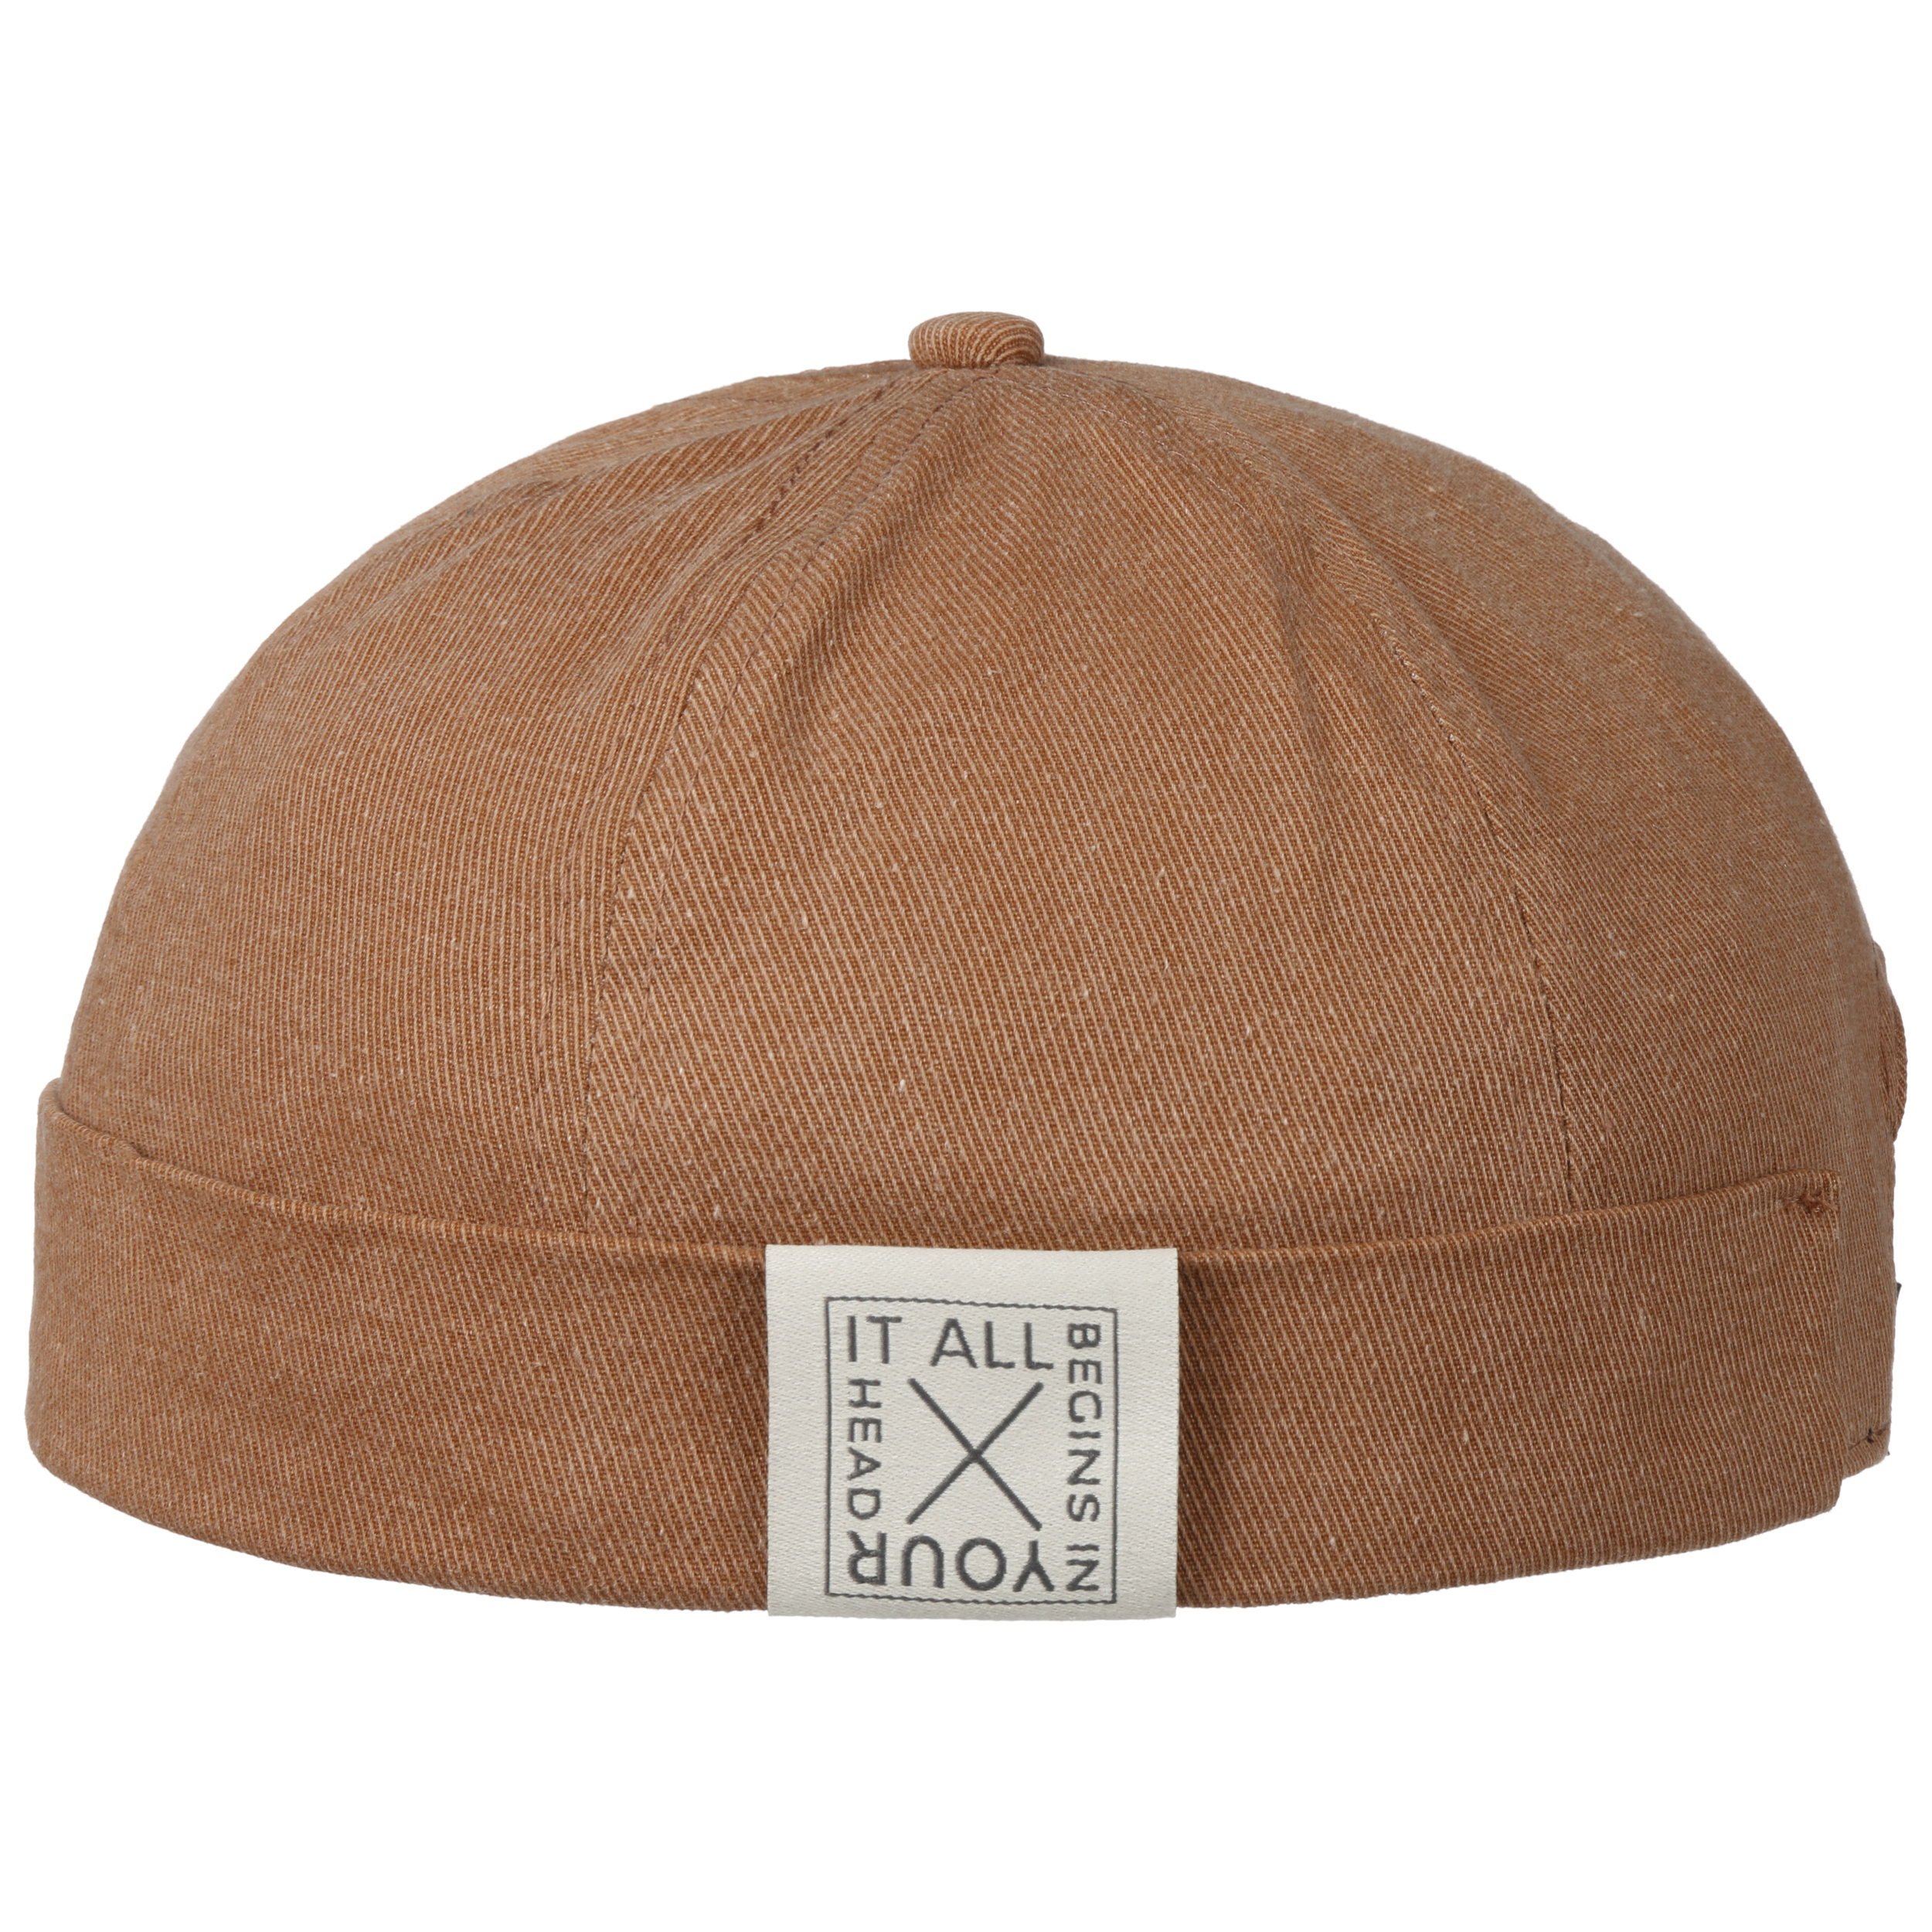 Yao Docker Hat Chillouts 26,95 - € by